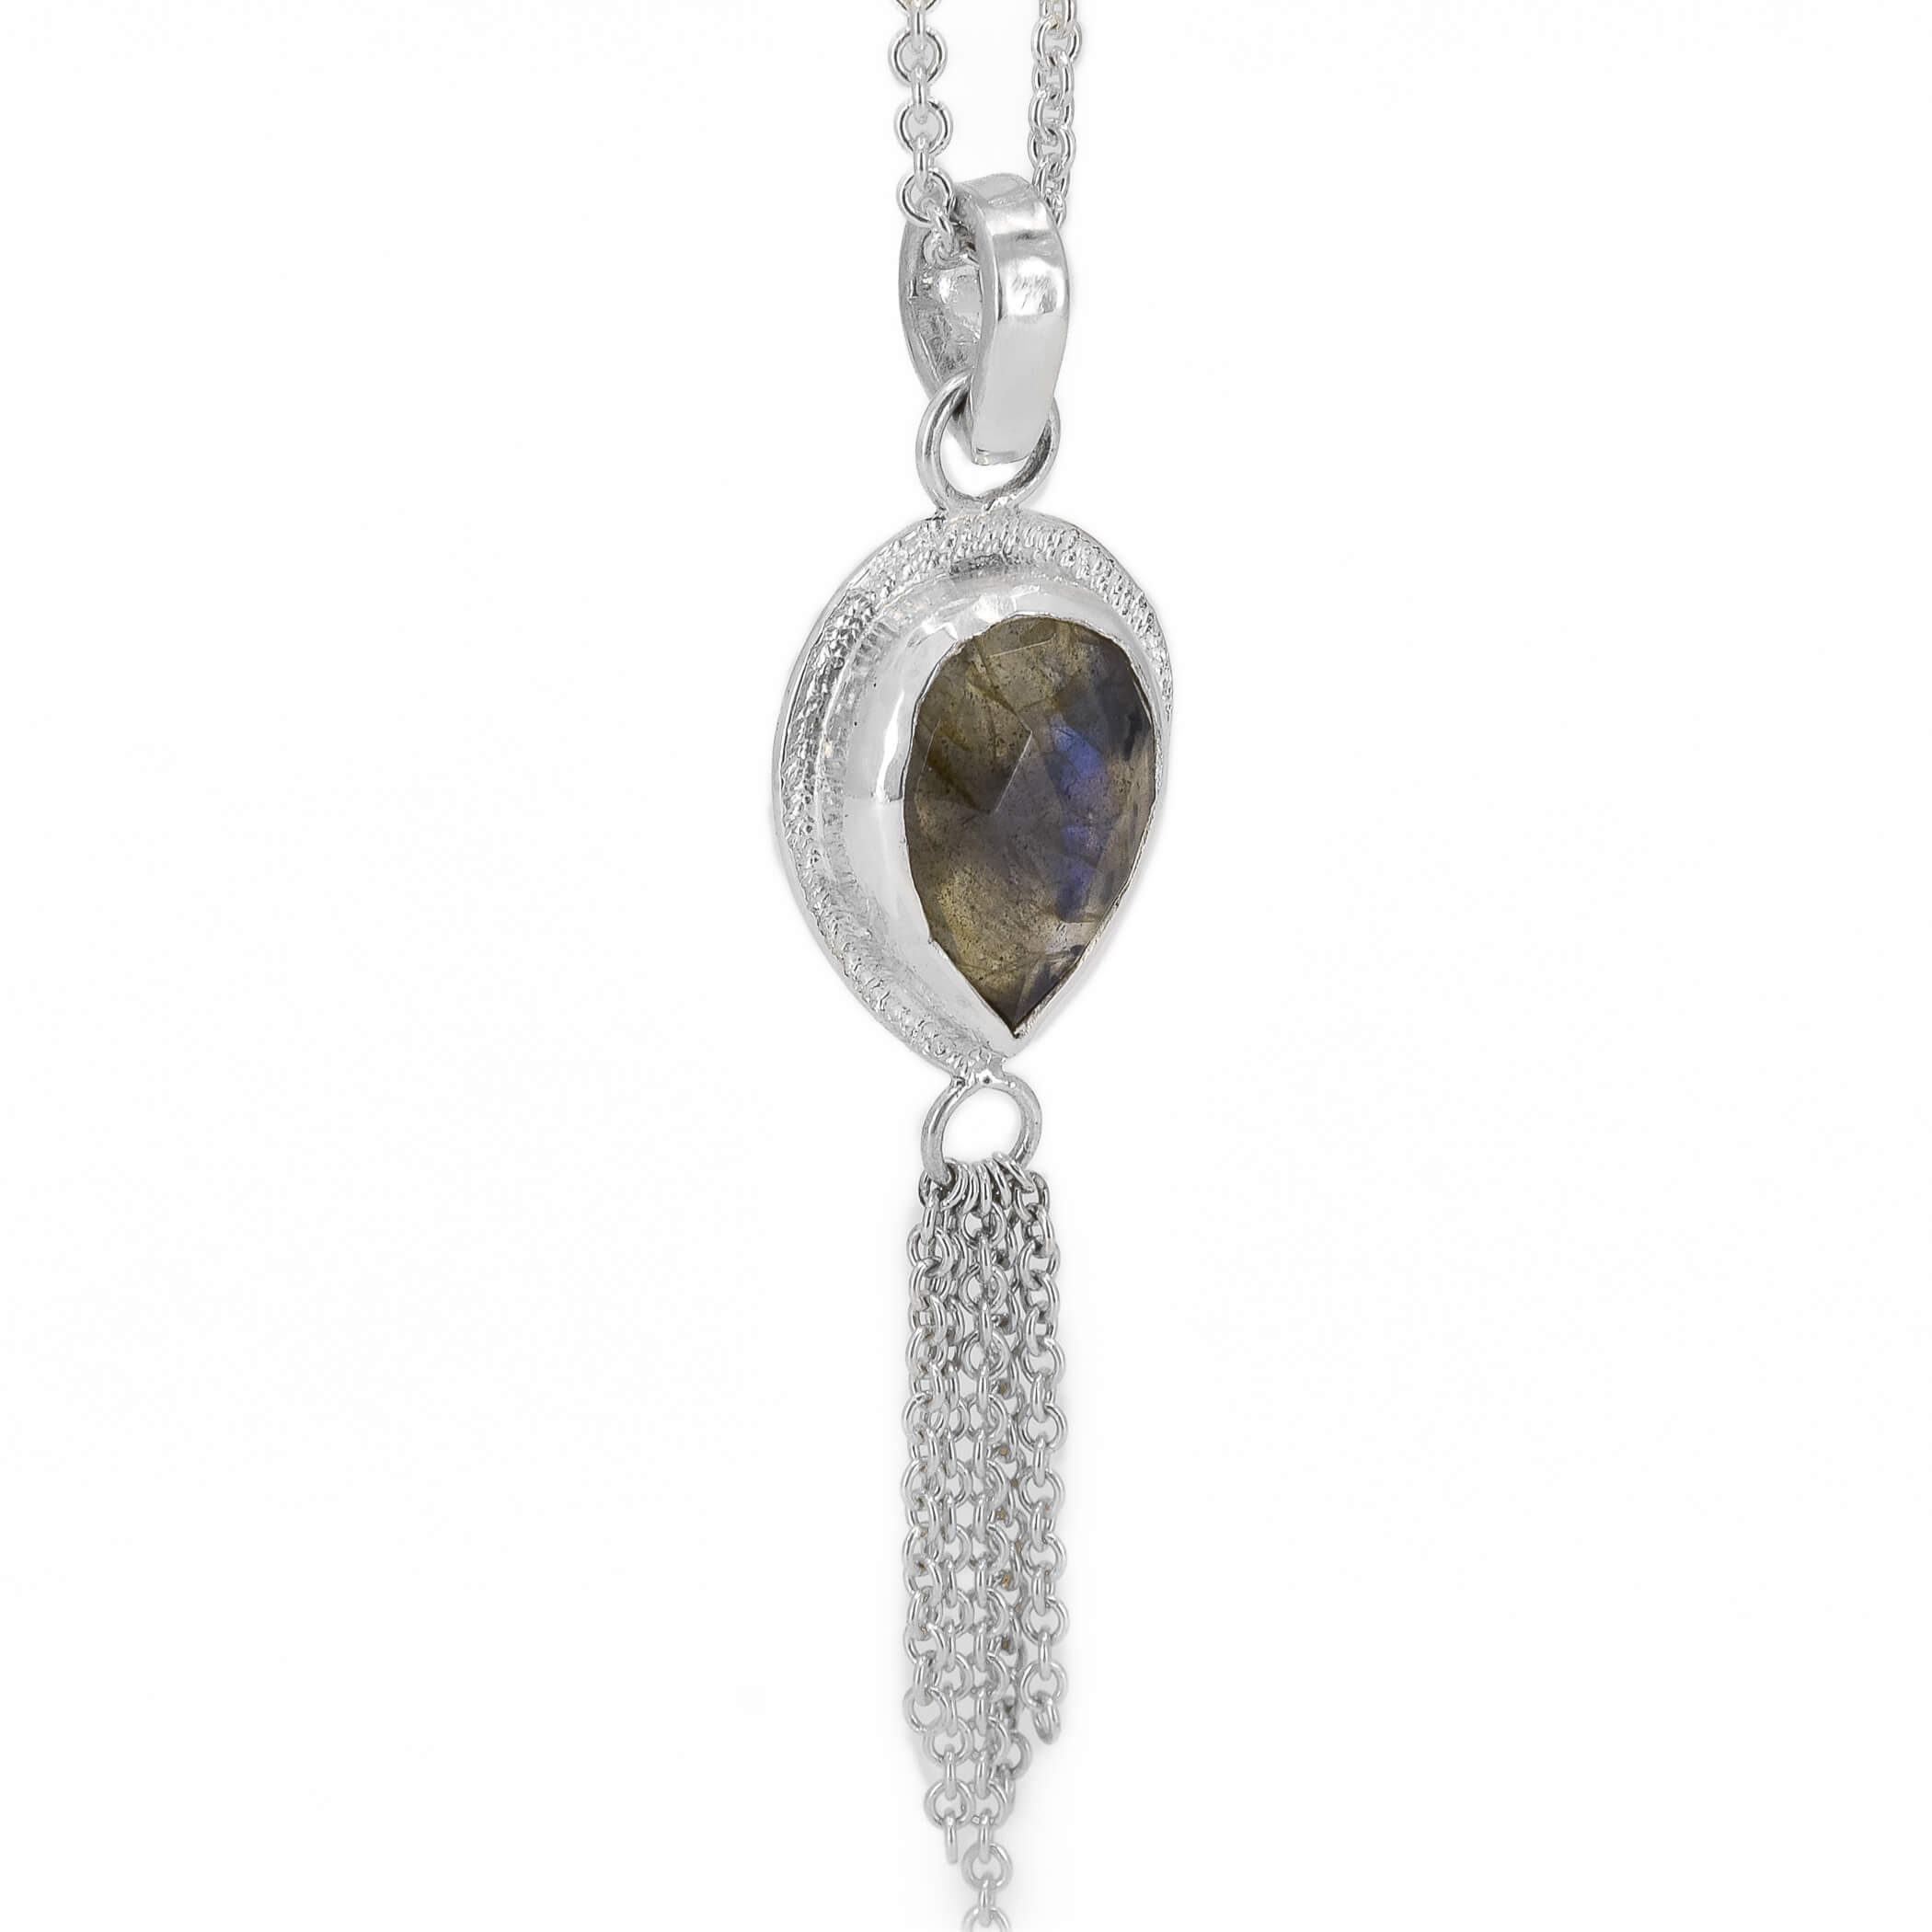 Teardrop labradorite set in sterling silver with a dainty chain embellishment hanging at the bottom